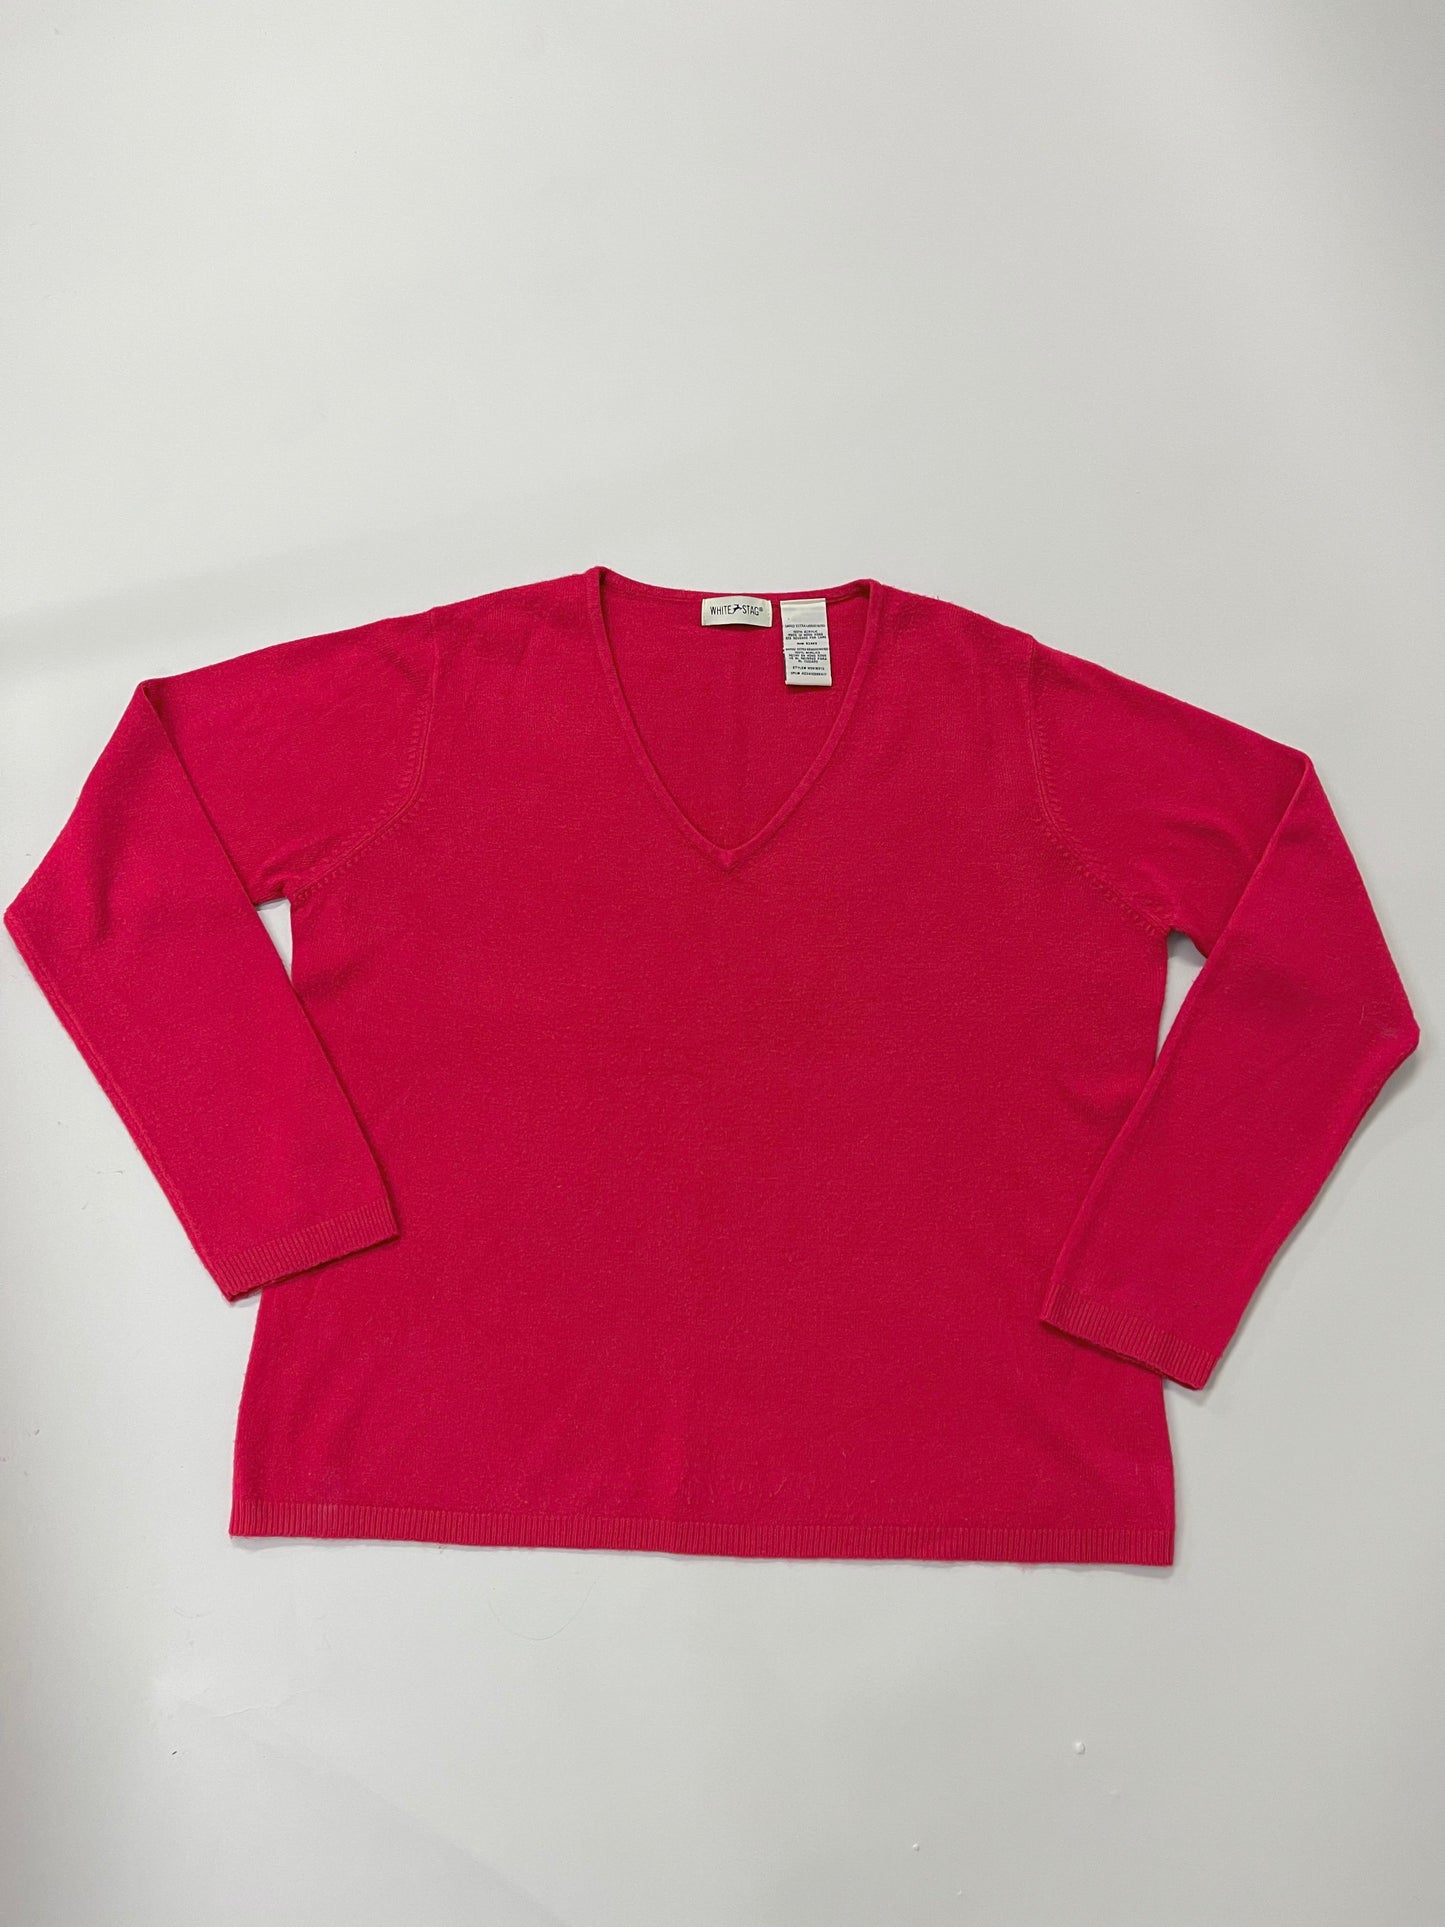 Red V-Neck Sweater - X-Large